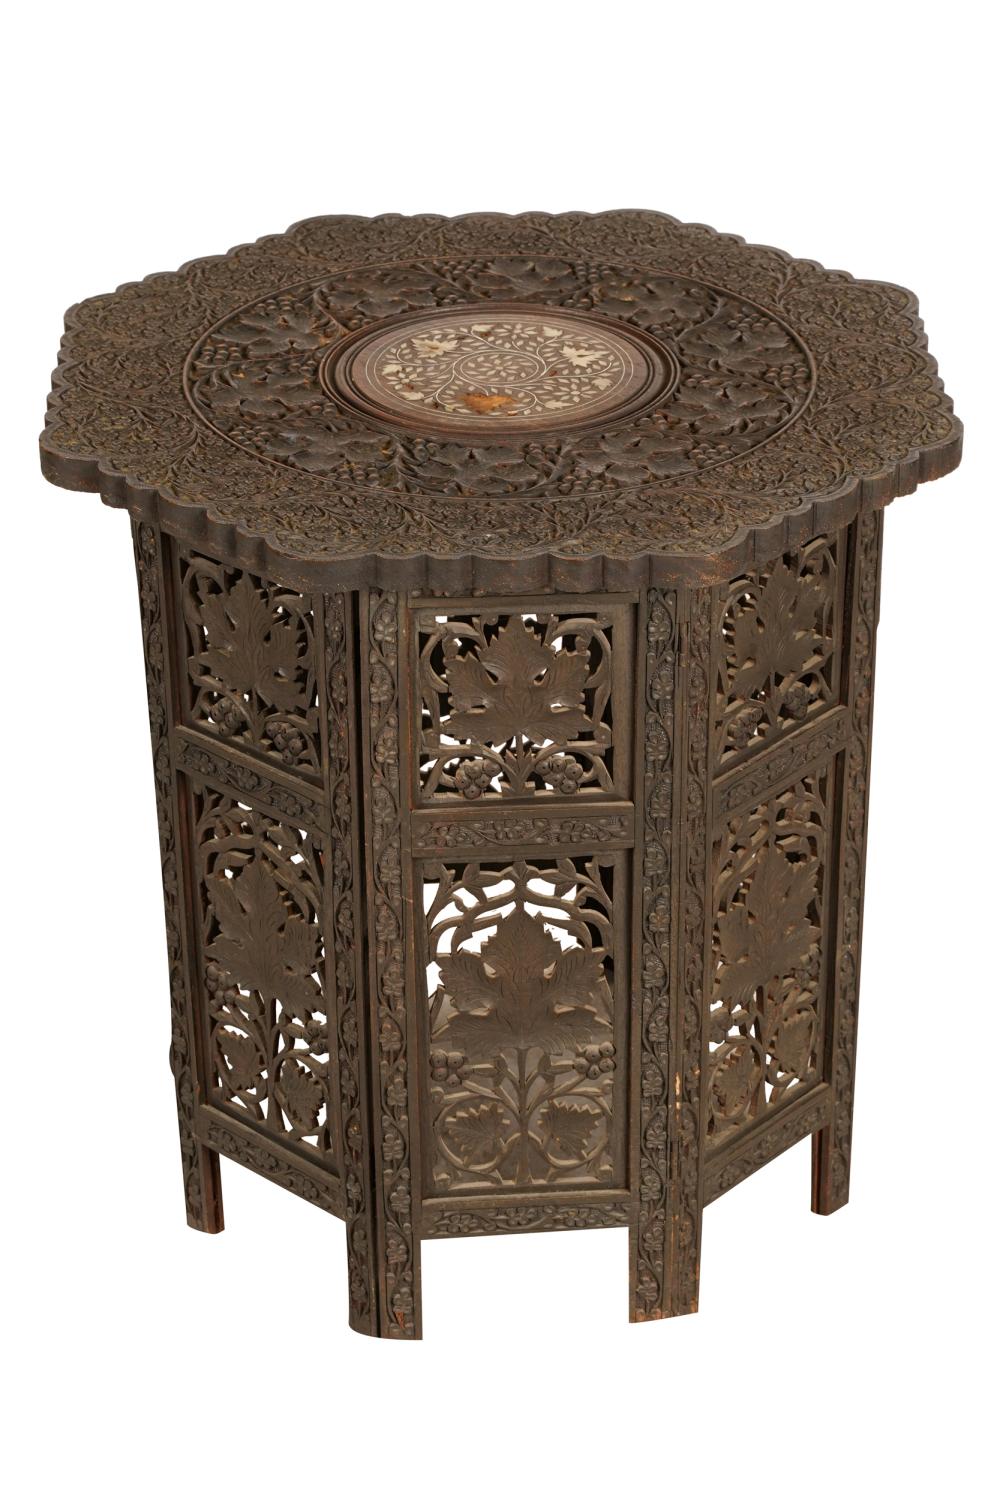 LEVANTINE STYLE CARVED WOOD FOLDING 332e5d